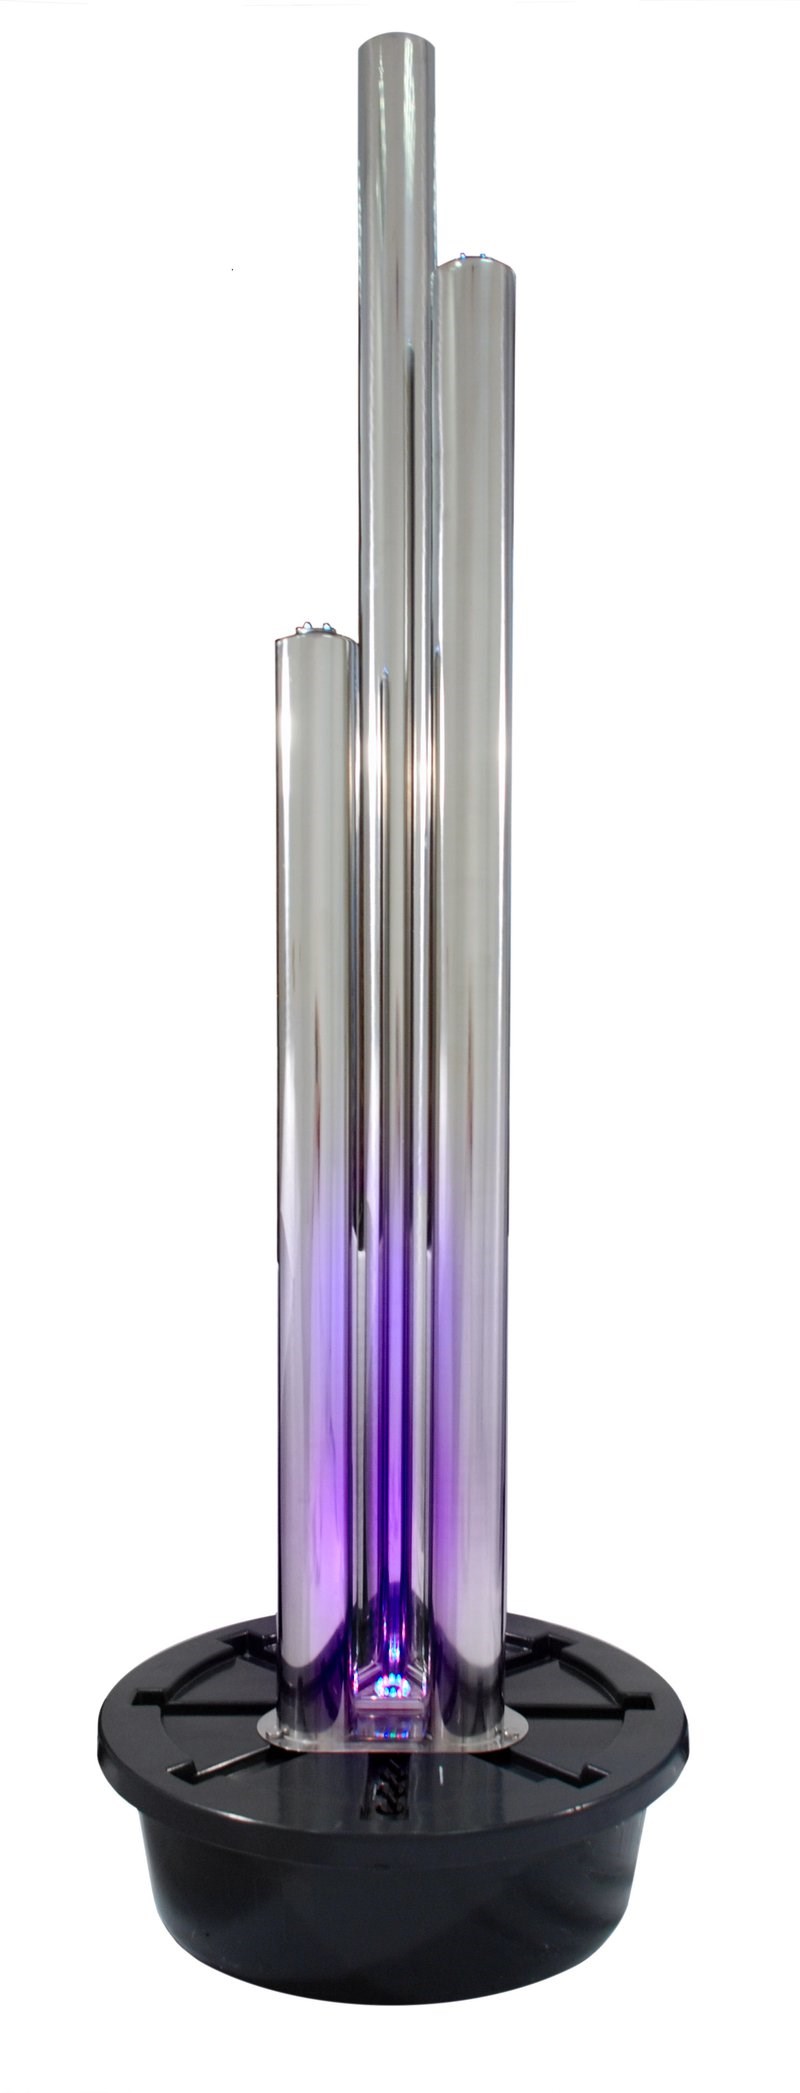 3 Tubes Advanced Stainless Steel Water Feature w/ Colour LEDs | Ambienté